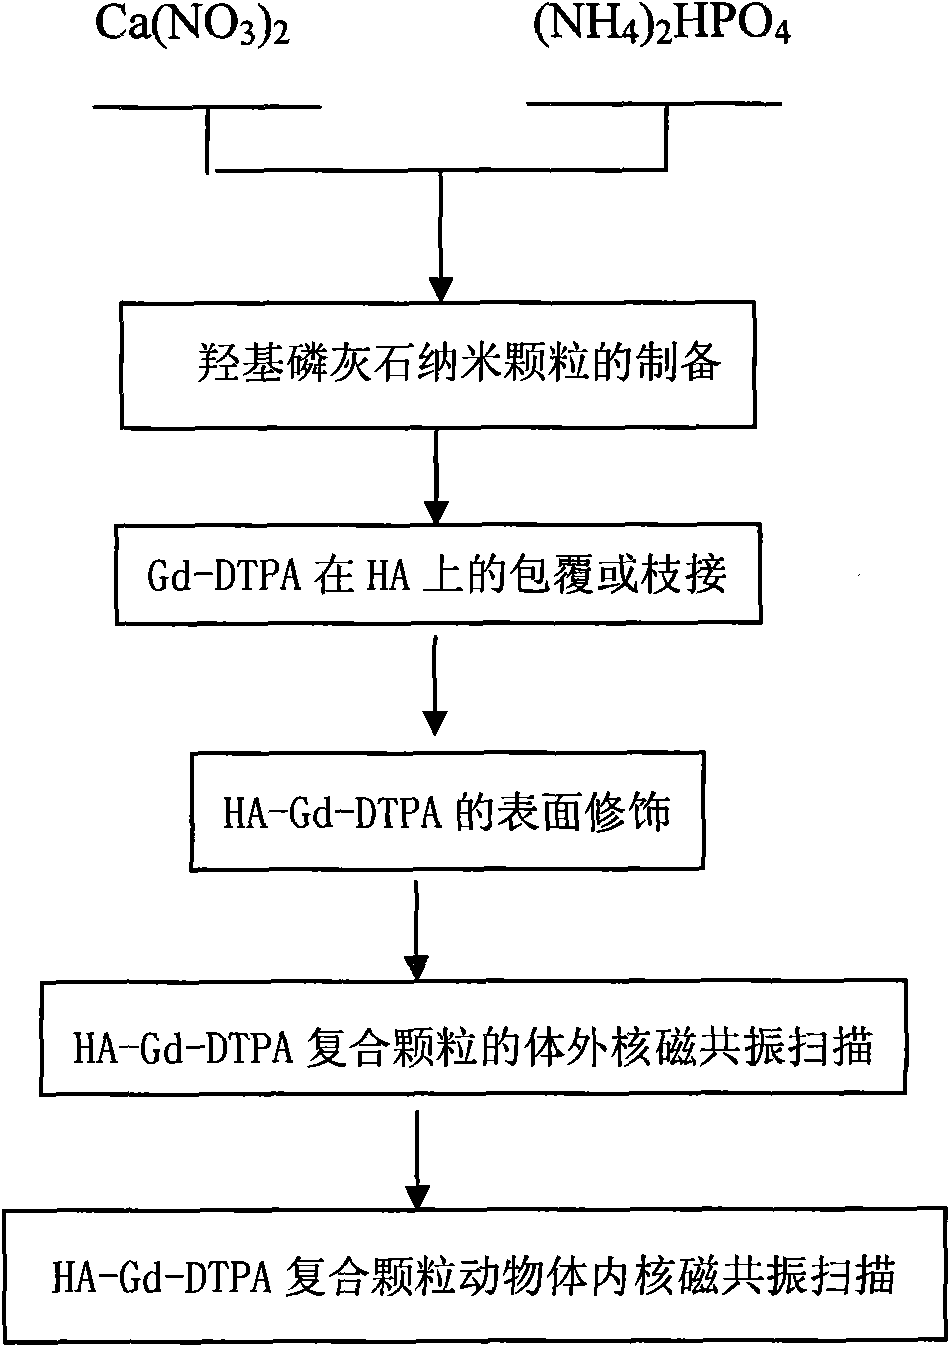 Liver, spleen specific positive magnetic nuclear resonance contrast agent and method of preparing the same